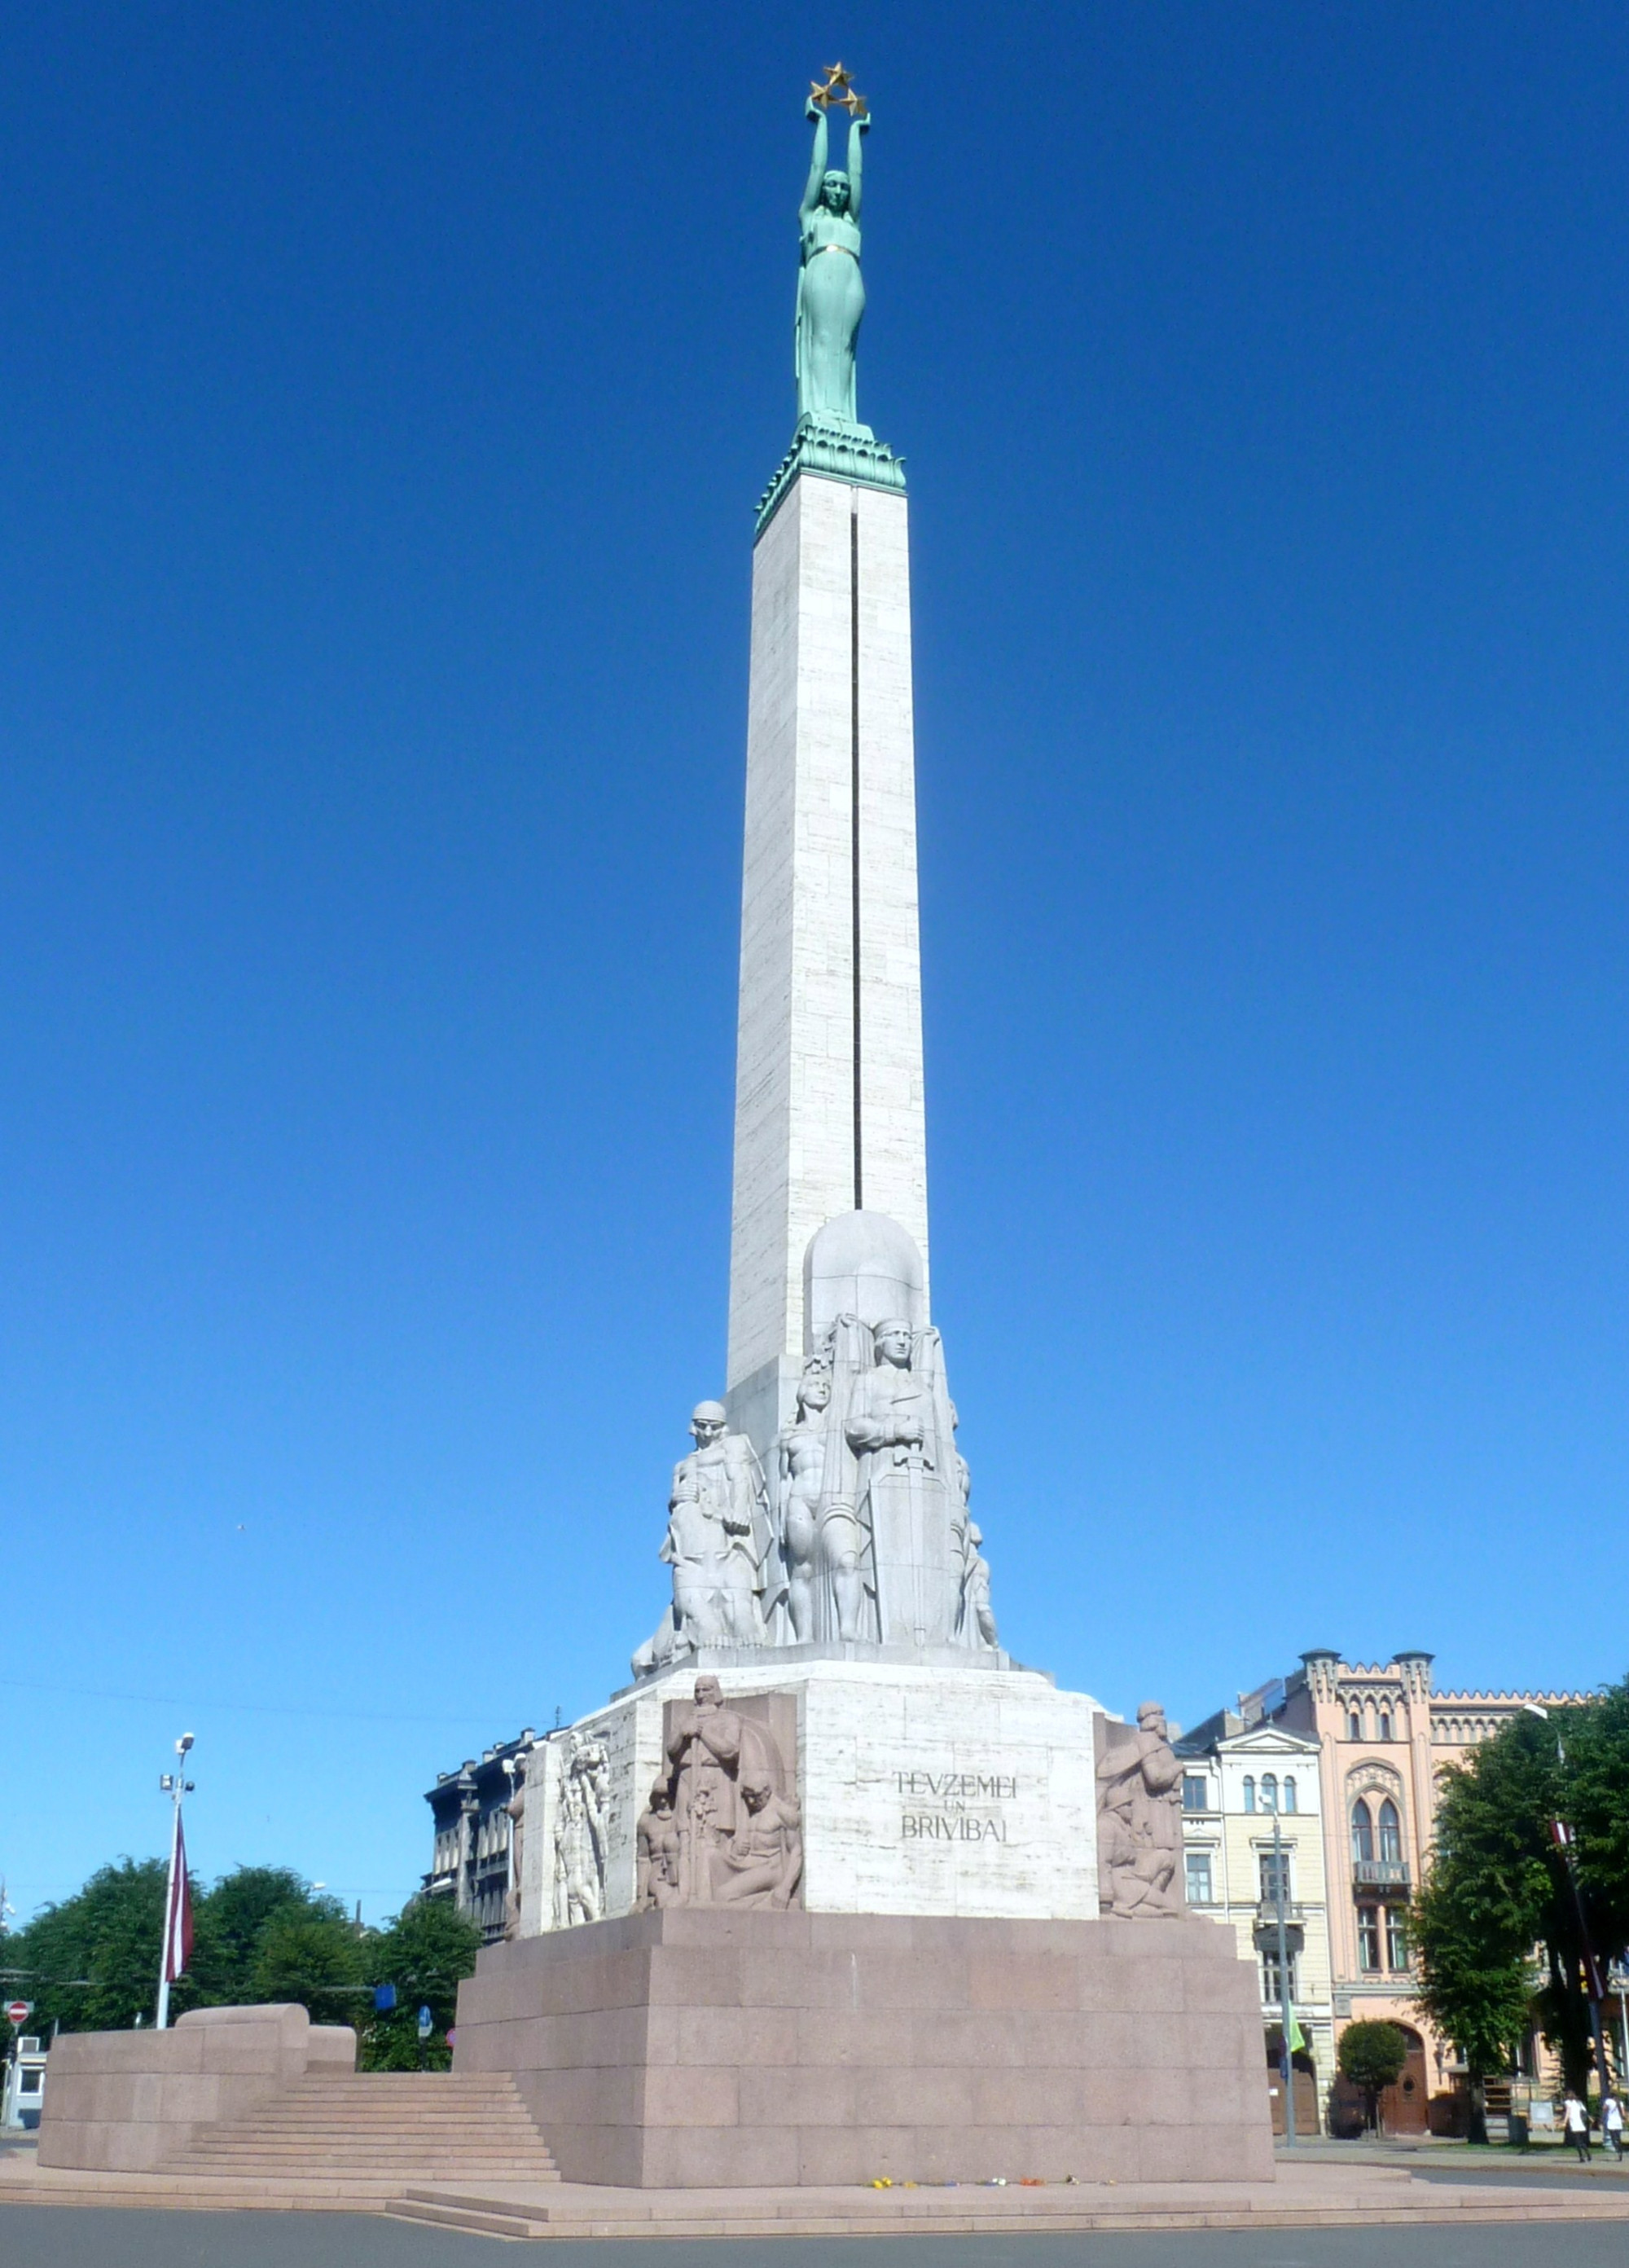 42m statue dedicated to Latvians who lost their lives fighting for independence between 1918 & 1920.